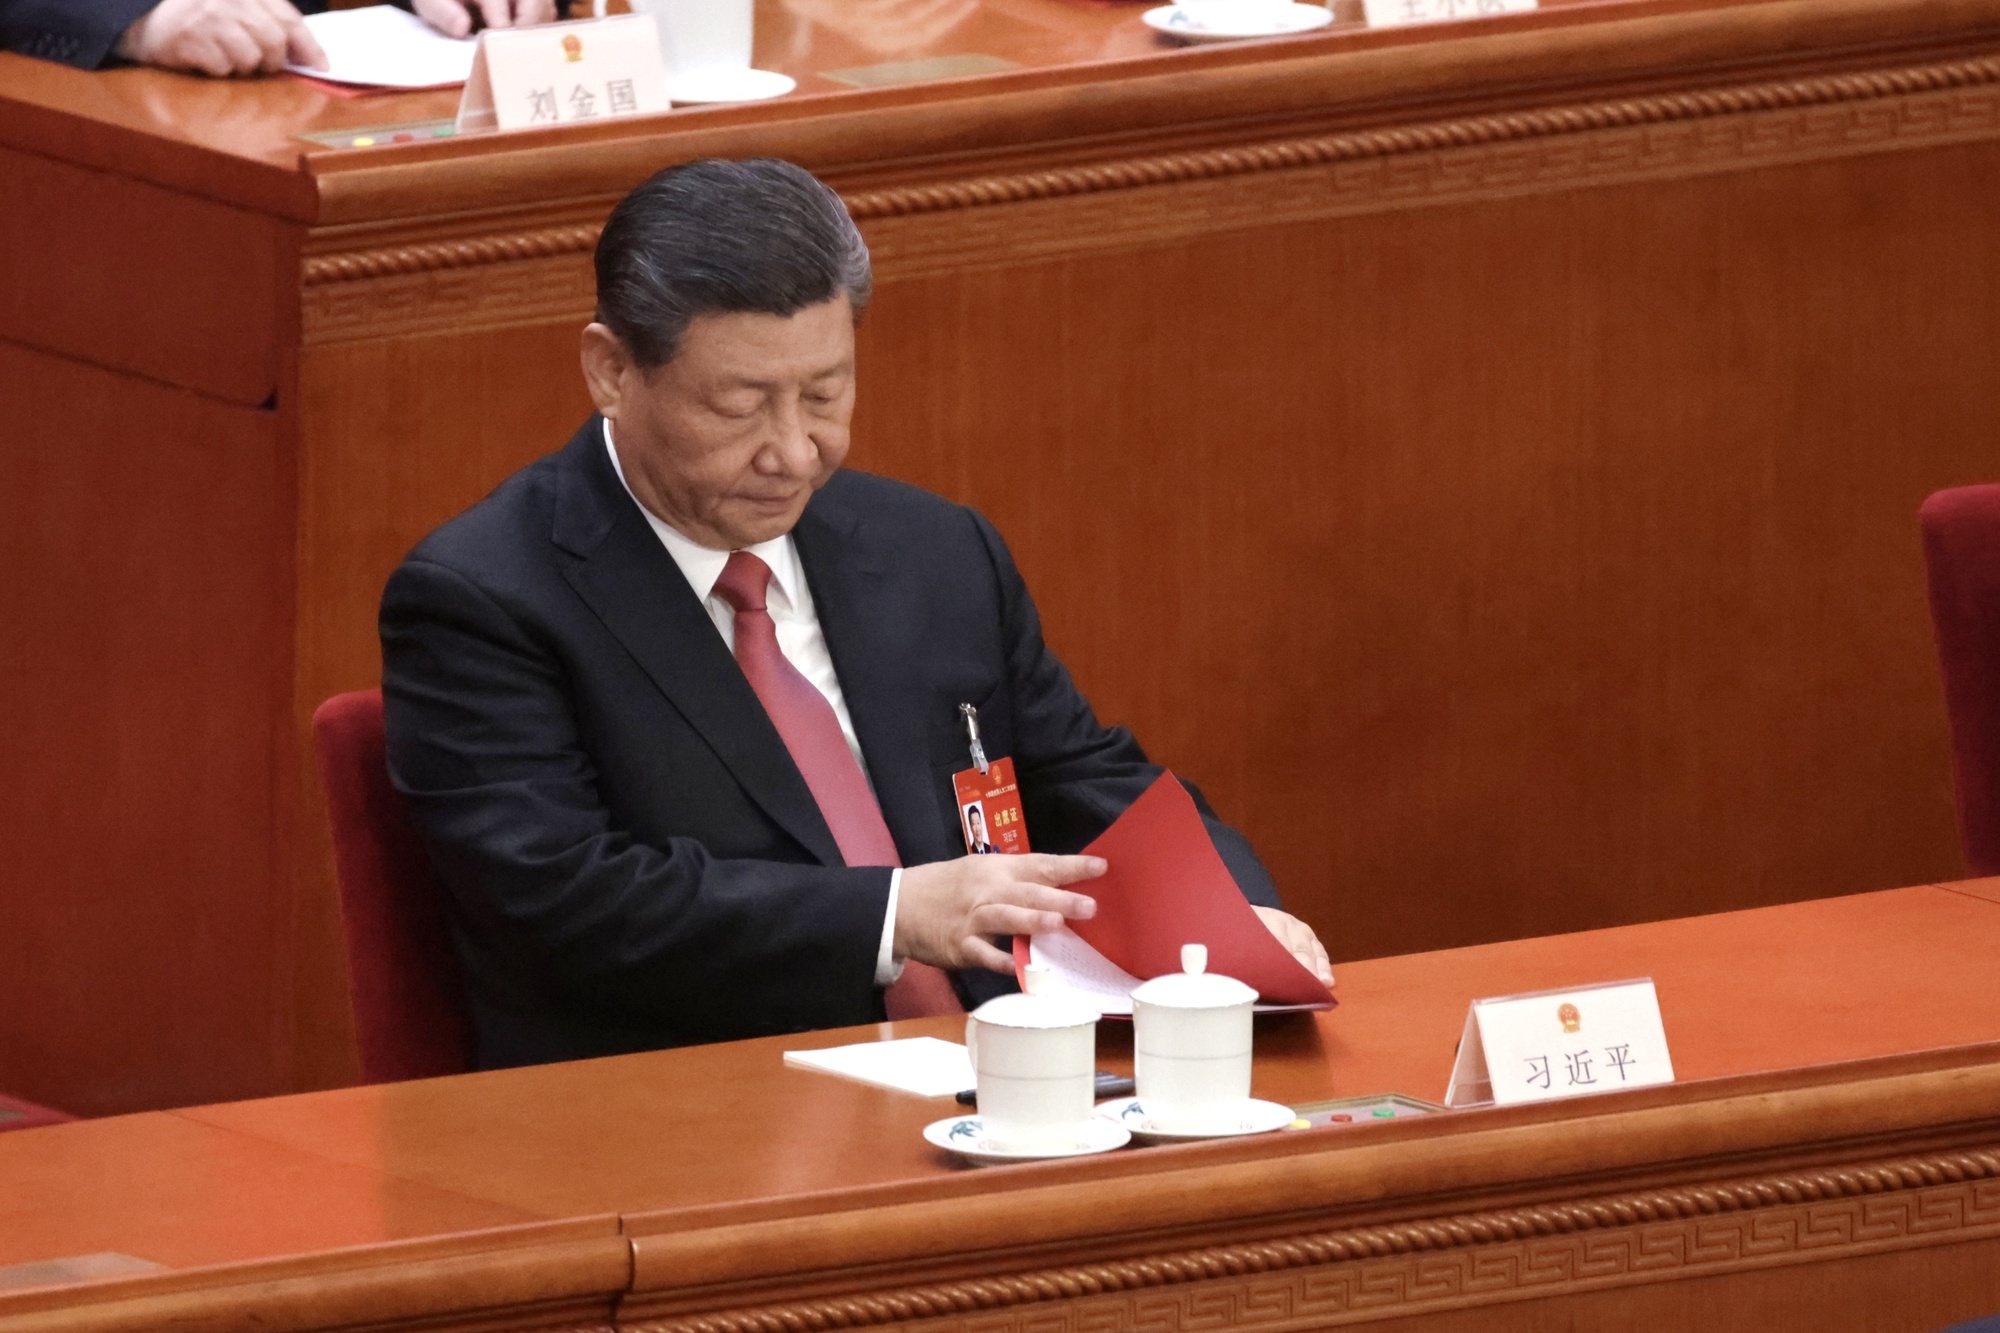 epa11213960 Chinese President Xi Jinping checks documents during the closing meeting of the second session of the 14th National People&#039;s Congress (NPC) at the Great Hall of the People in Beijing, China, 11 March 2024. China holds two major annual political meetings, the National People&#039;s Congress (NPC) and the Chinese People&#039;s Political Consultative Conference (CPPCC), which run alongside each other and are known as &#039;Lianghui&#039; or &#039;Two Sessions.&#039;  EPA/ANDRES MARTINEZ CASARES